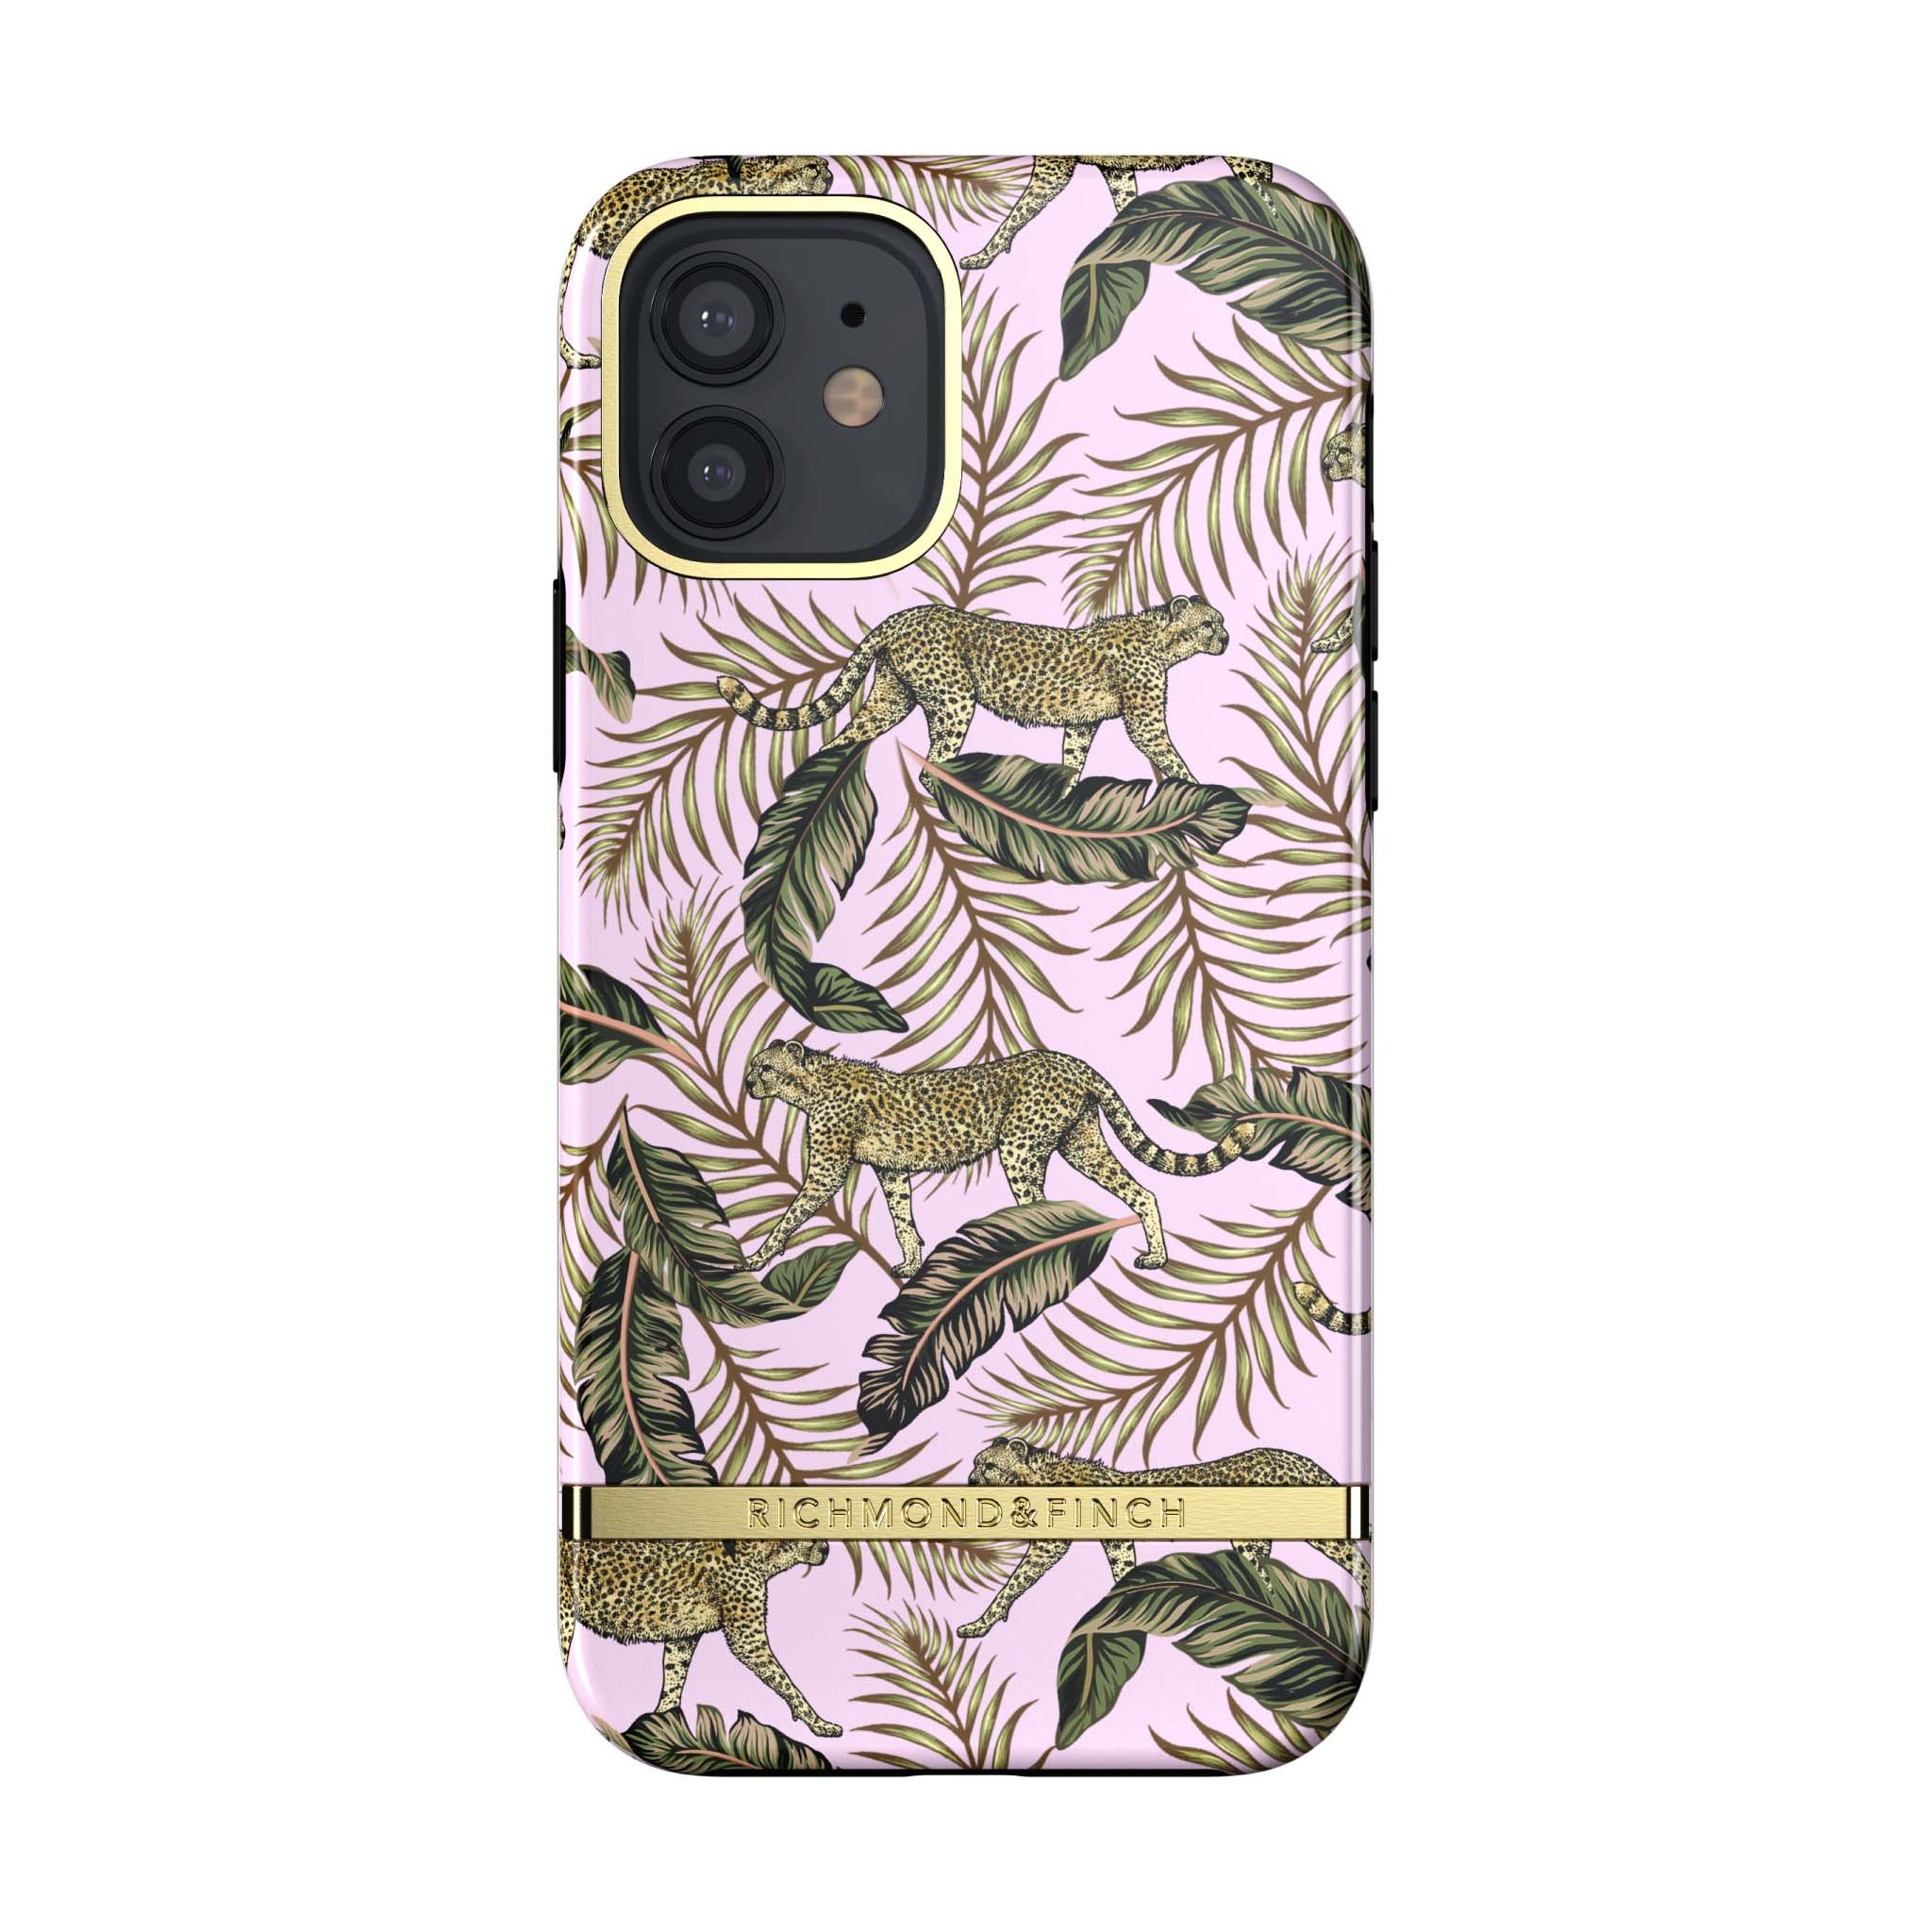 PINK APPLE, 12 FINCH Backcover, & PRO, Pink RICHMOND Jungle, IPHONE